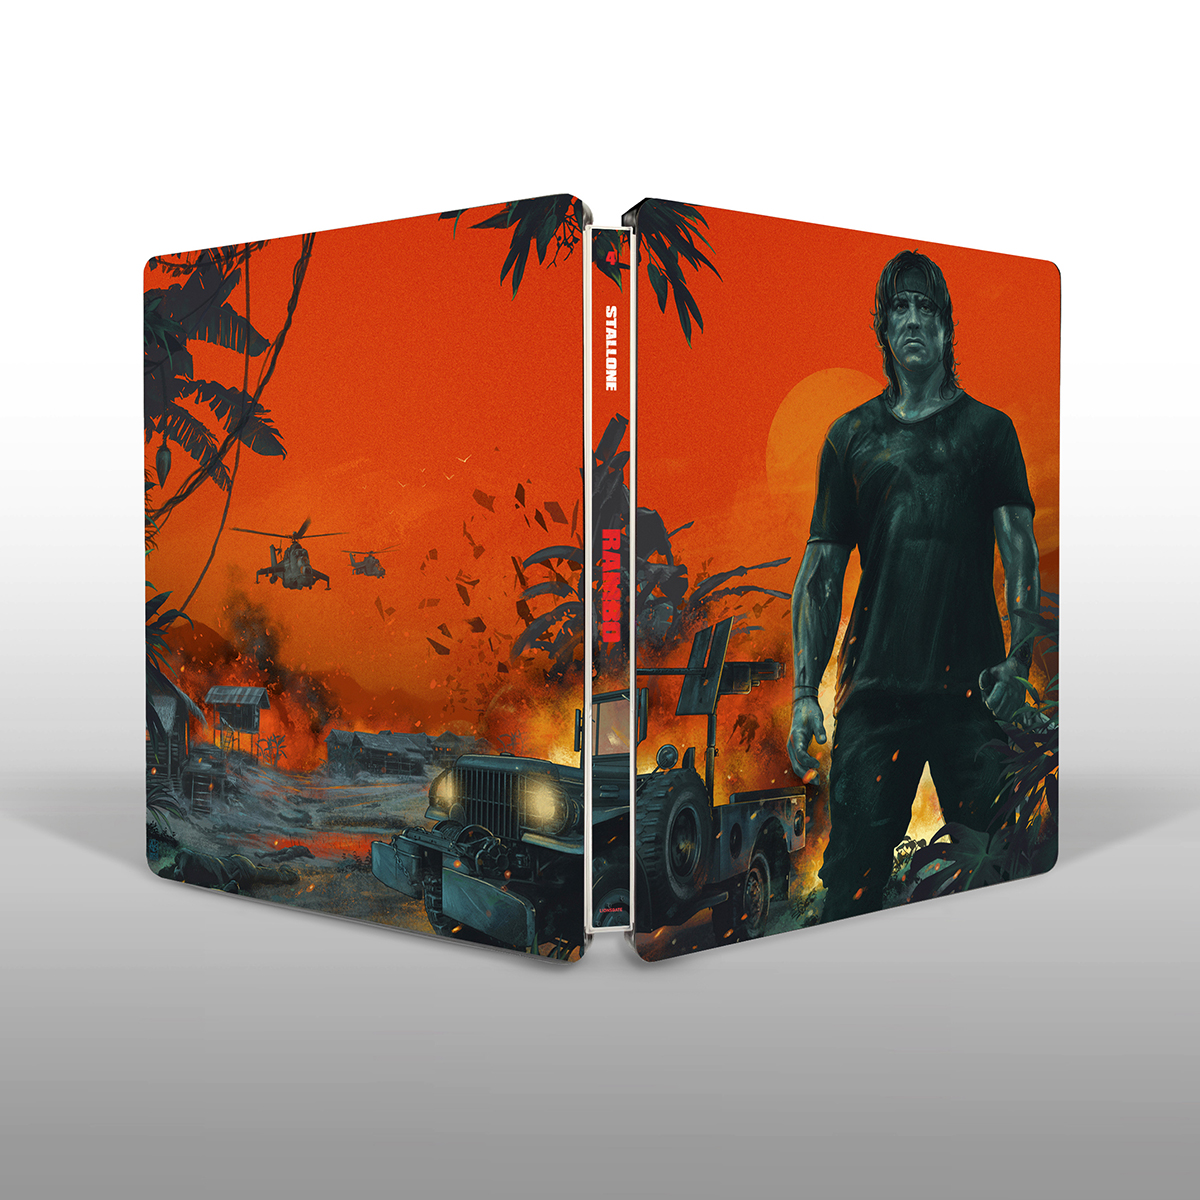 Rambo - The Complete SteelBook Collection - 4KUHD